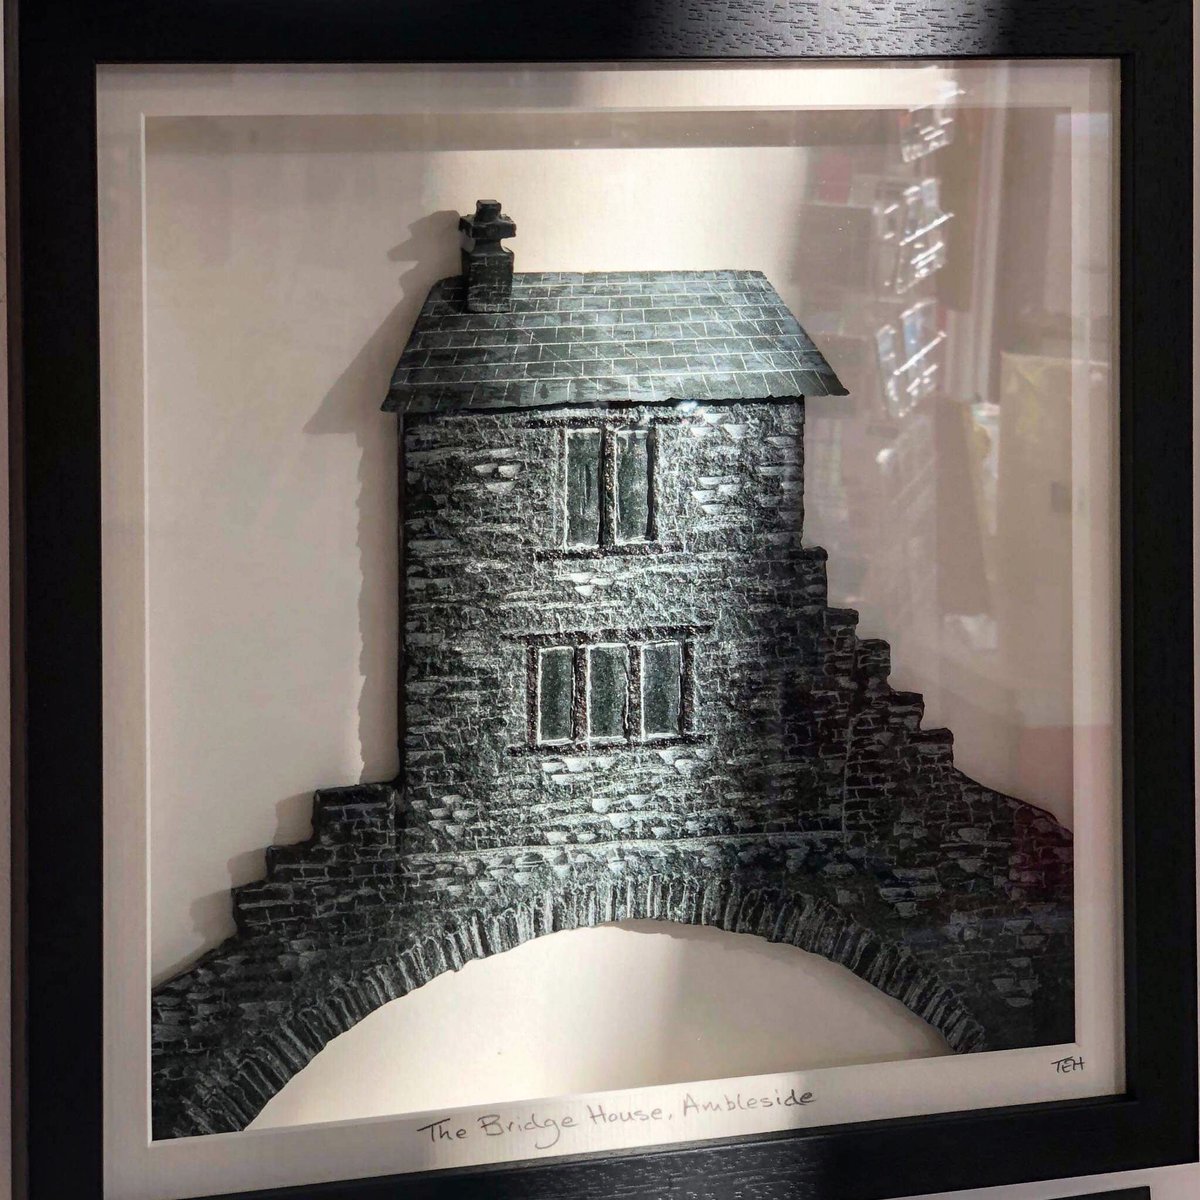 The Bridge House Ambleside by Terry Hawkins @LovingSlate, looking amazing on the wall at #CherrydidiAmbleside in the gorgeous sunshine, such a beautiful piece of work and a splendid day! #greenslate #CumbrianSlate #TheBridgeHouseAmbleside #WinterSun